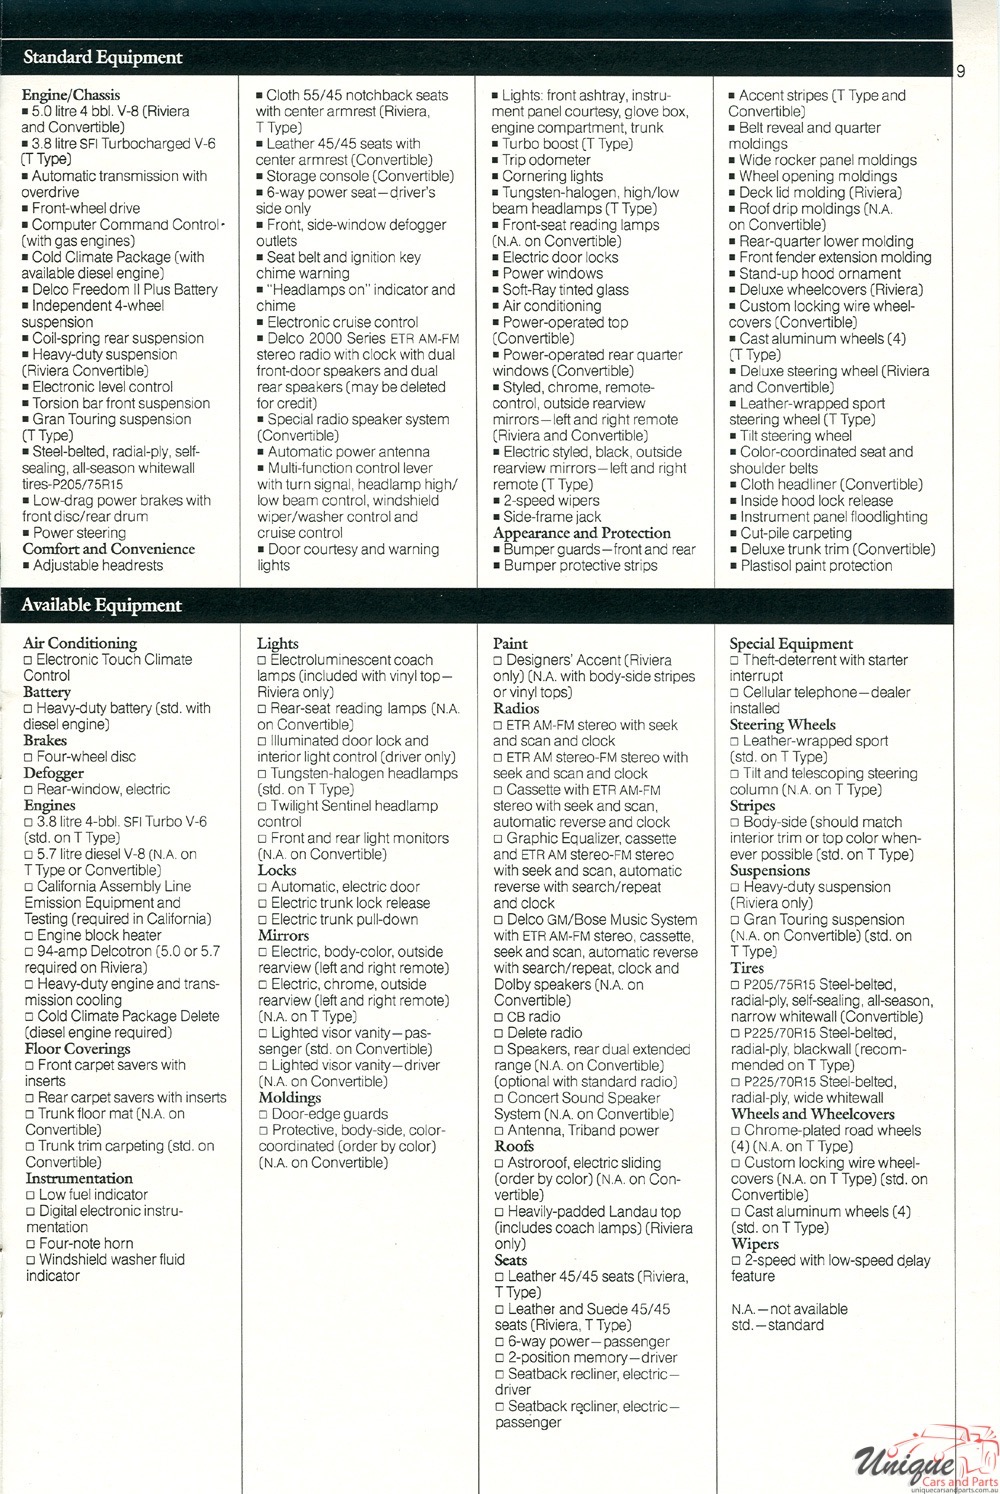 1985 Buick Buying Guide Page 9